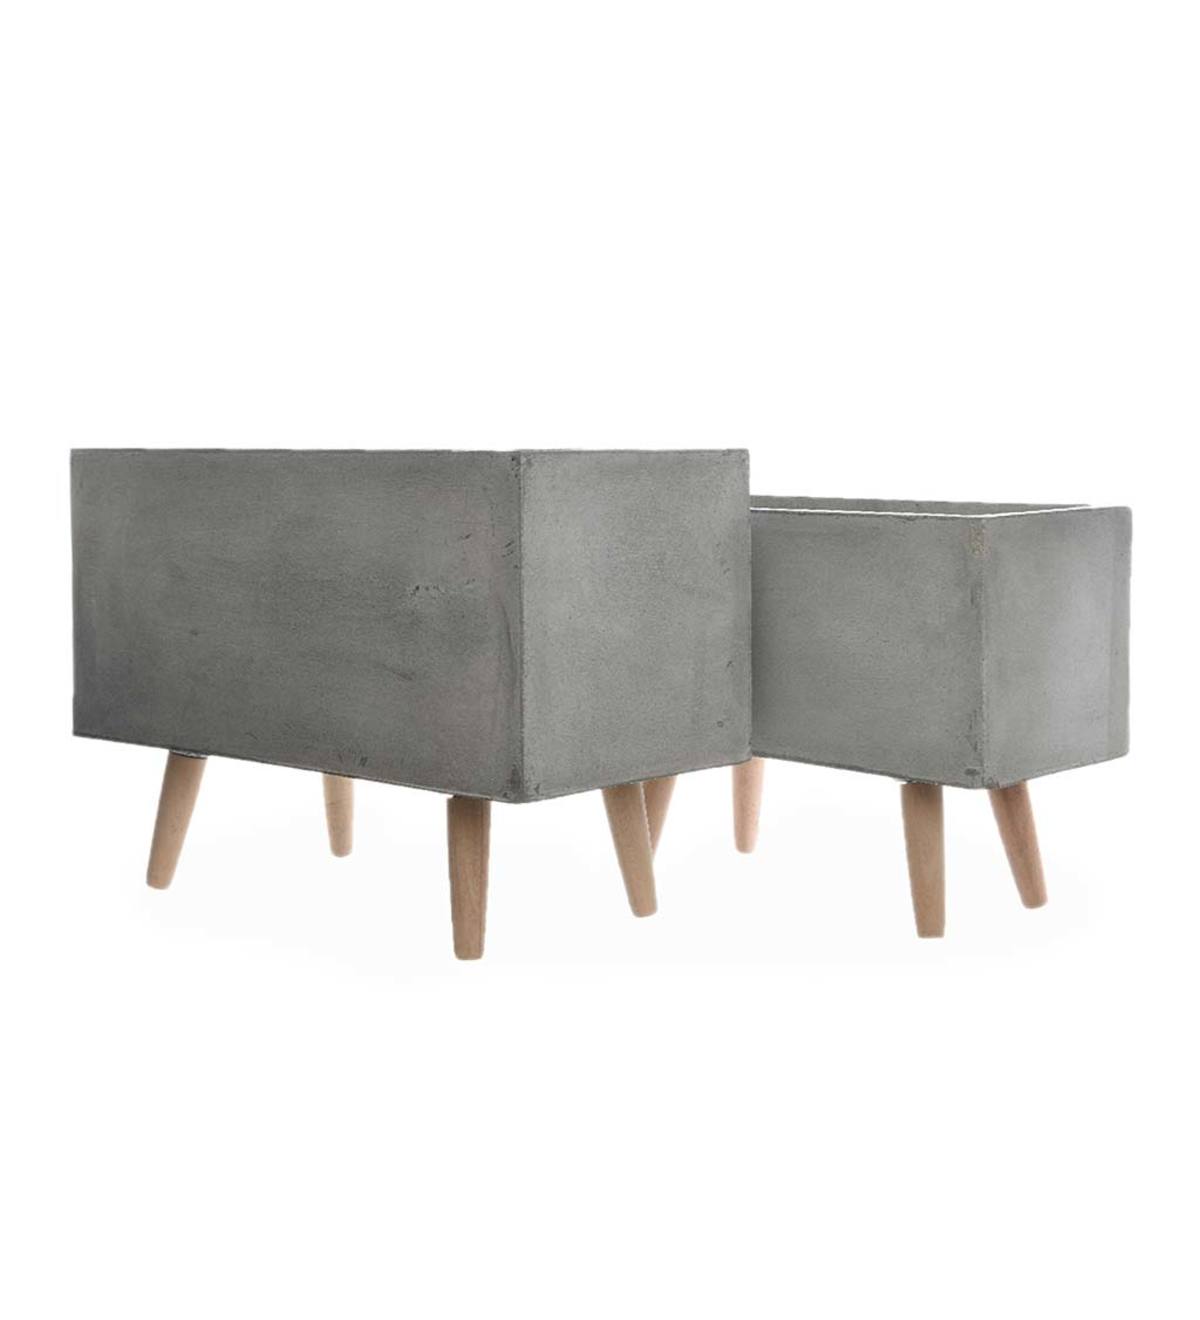 Clay Planters on Wooden Legs, Set of 2 - Light Gray